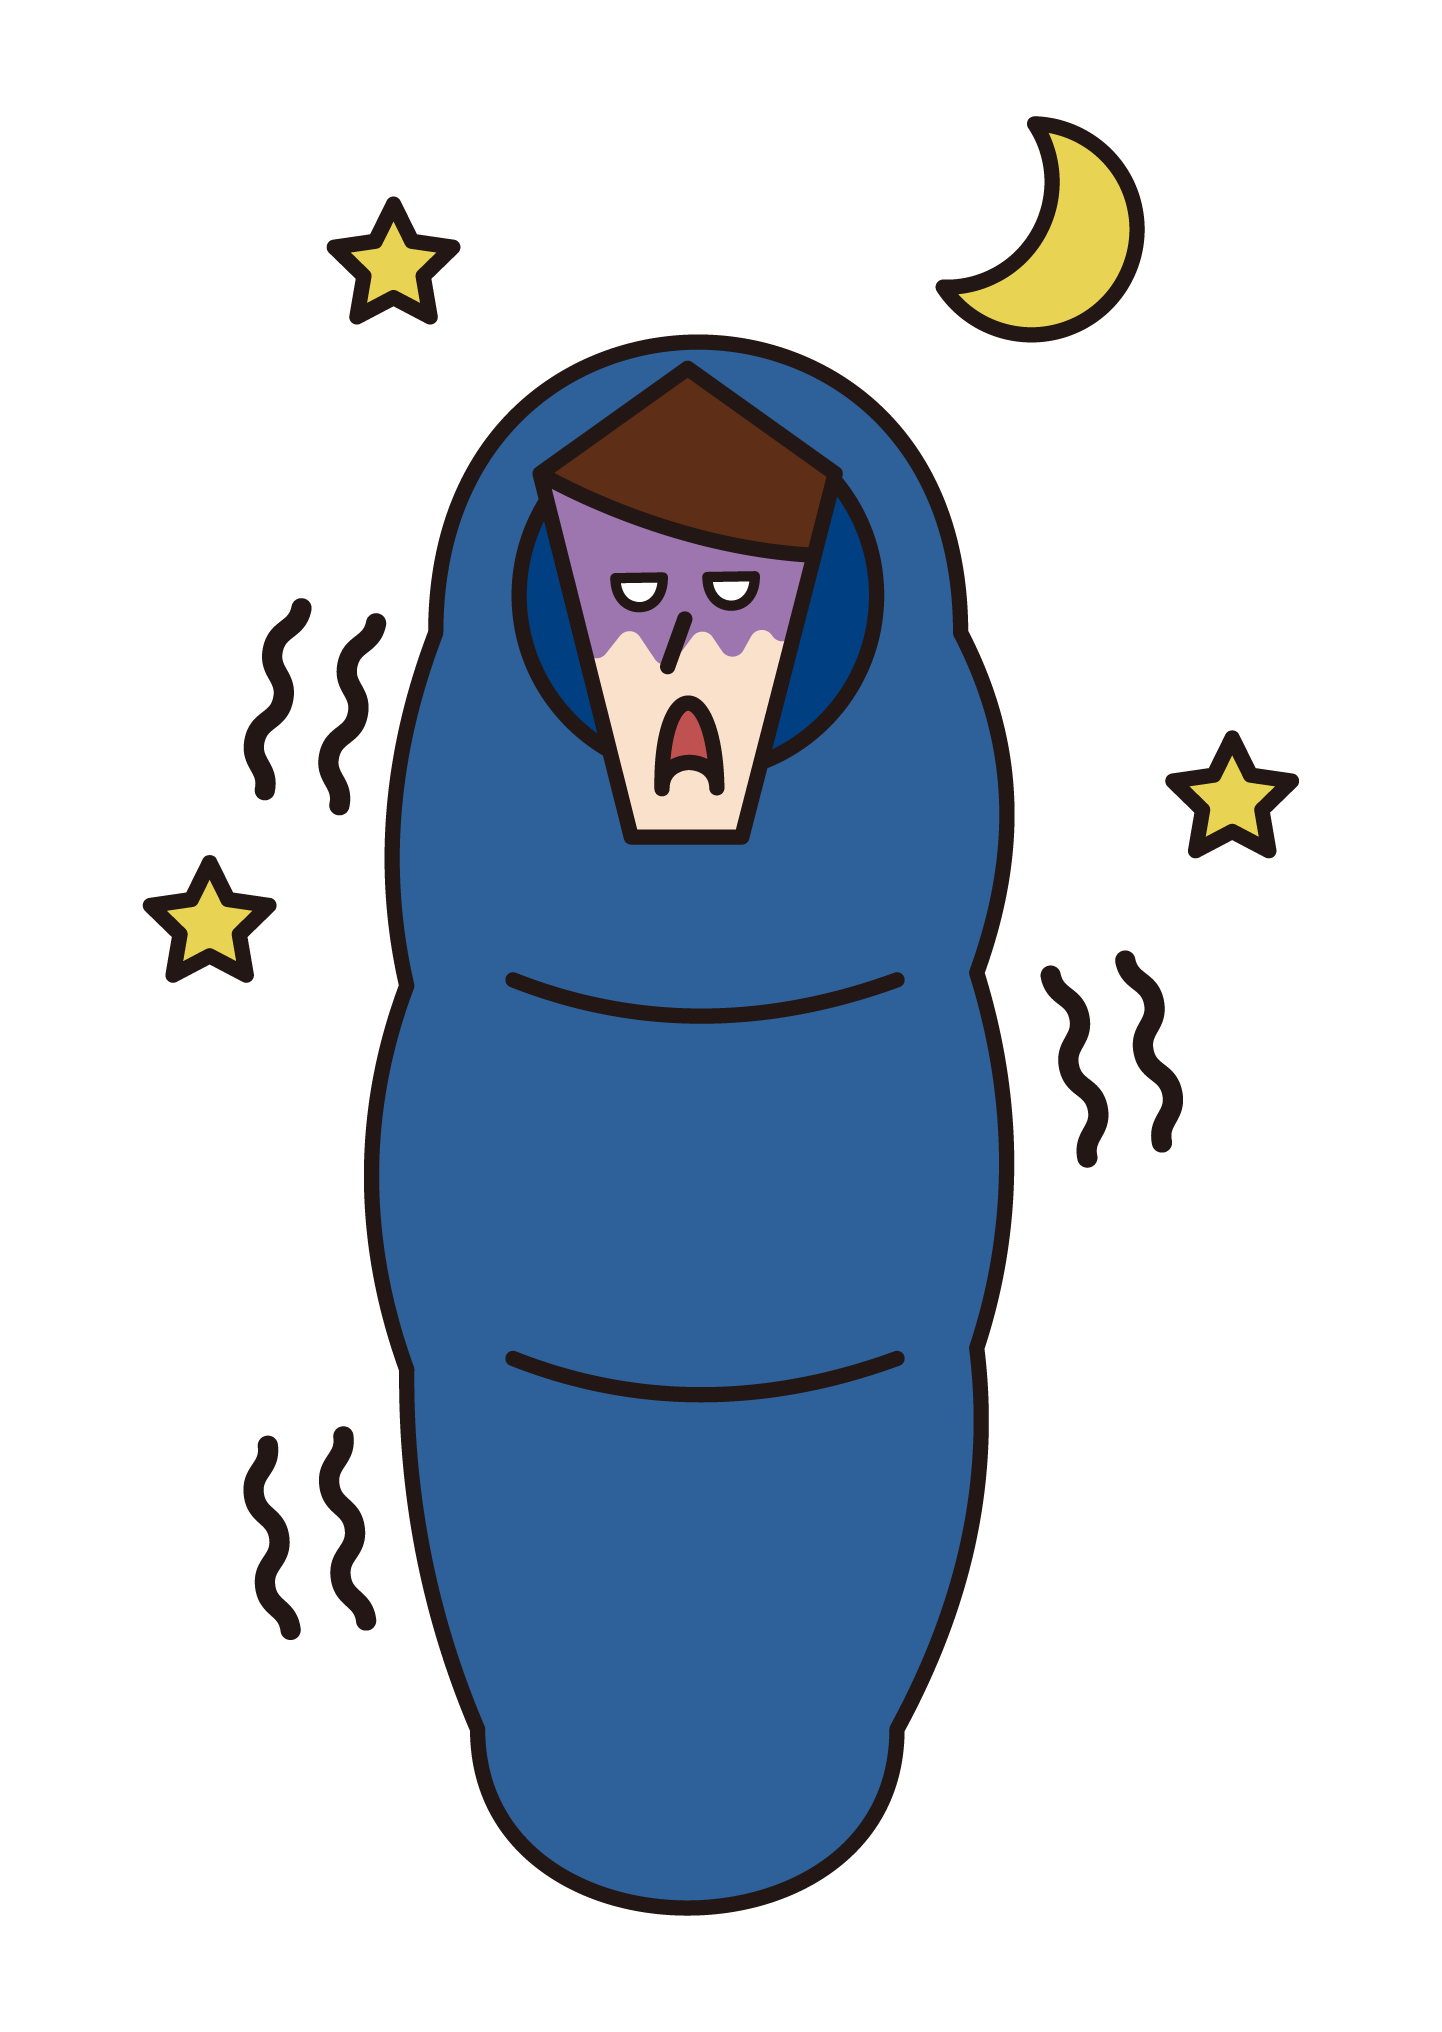 Illustration of a man (male) who sleeps in a sleeping bag and freezes